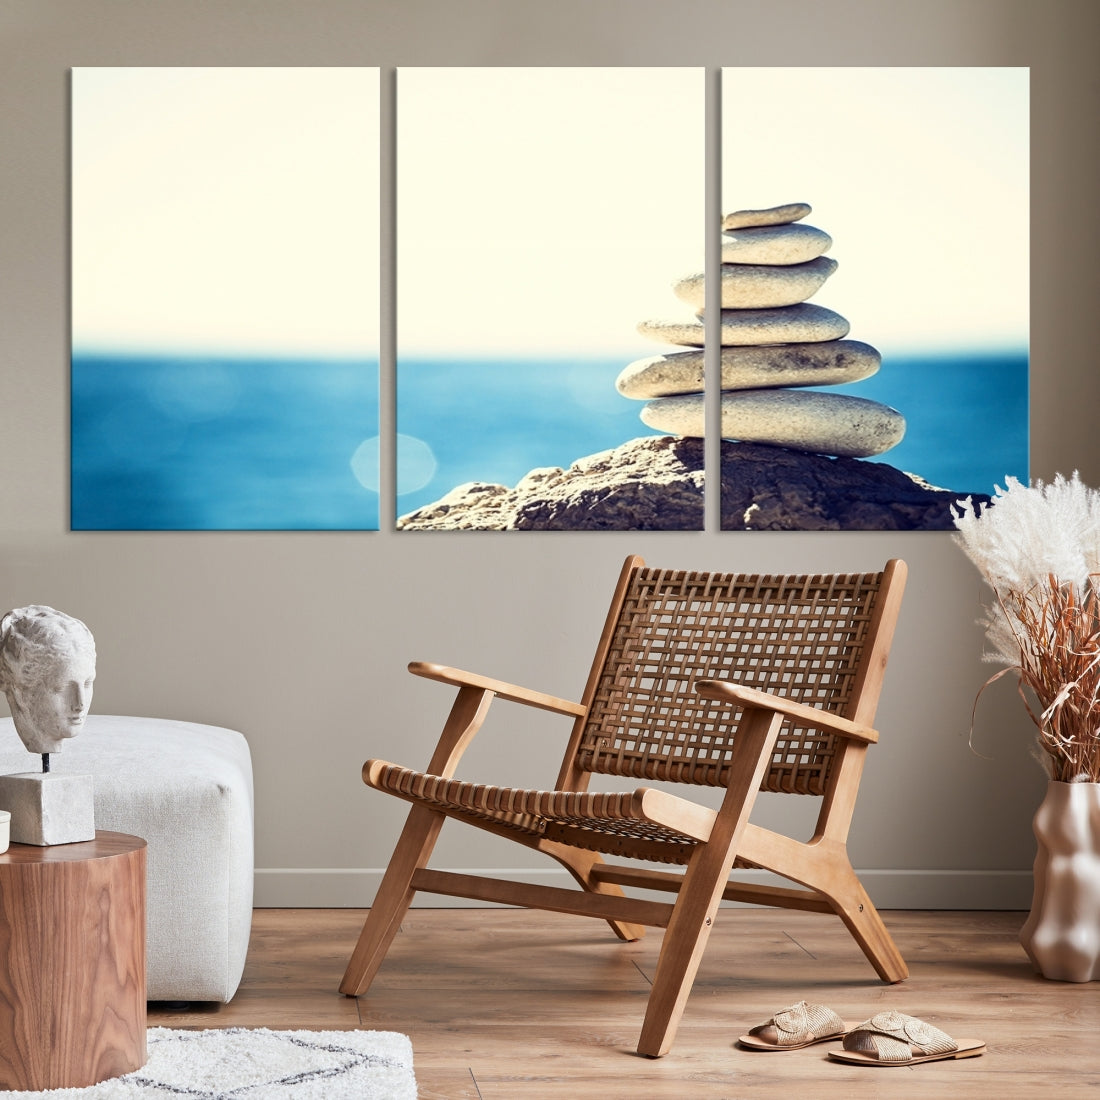 Zen Stones with Bright Sea and Sunshine on Background